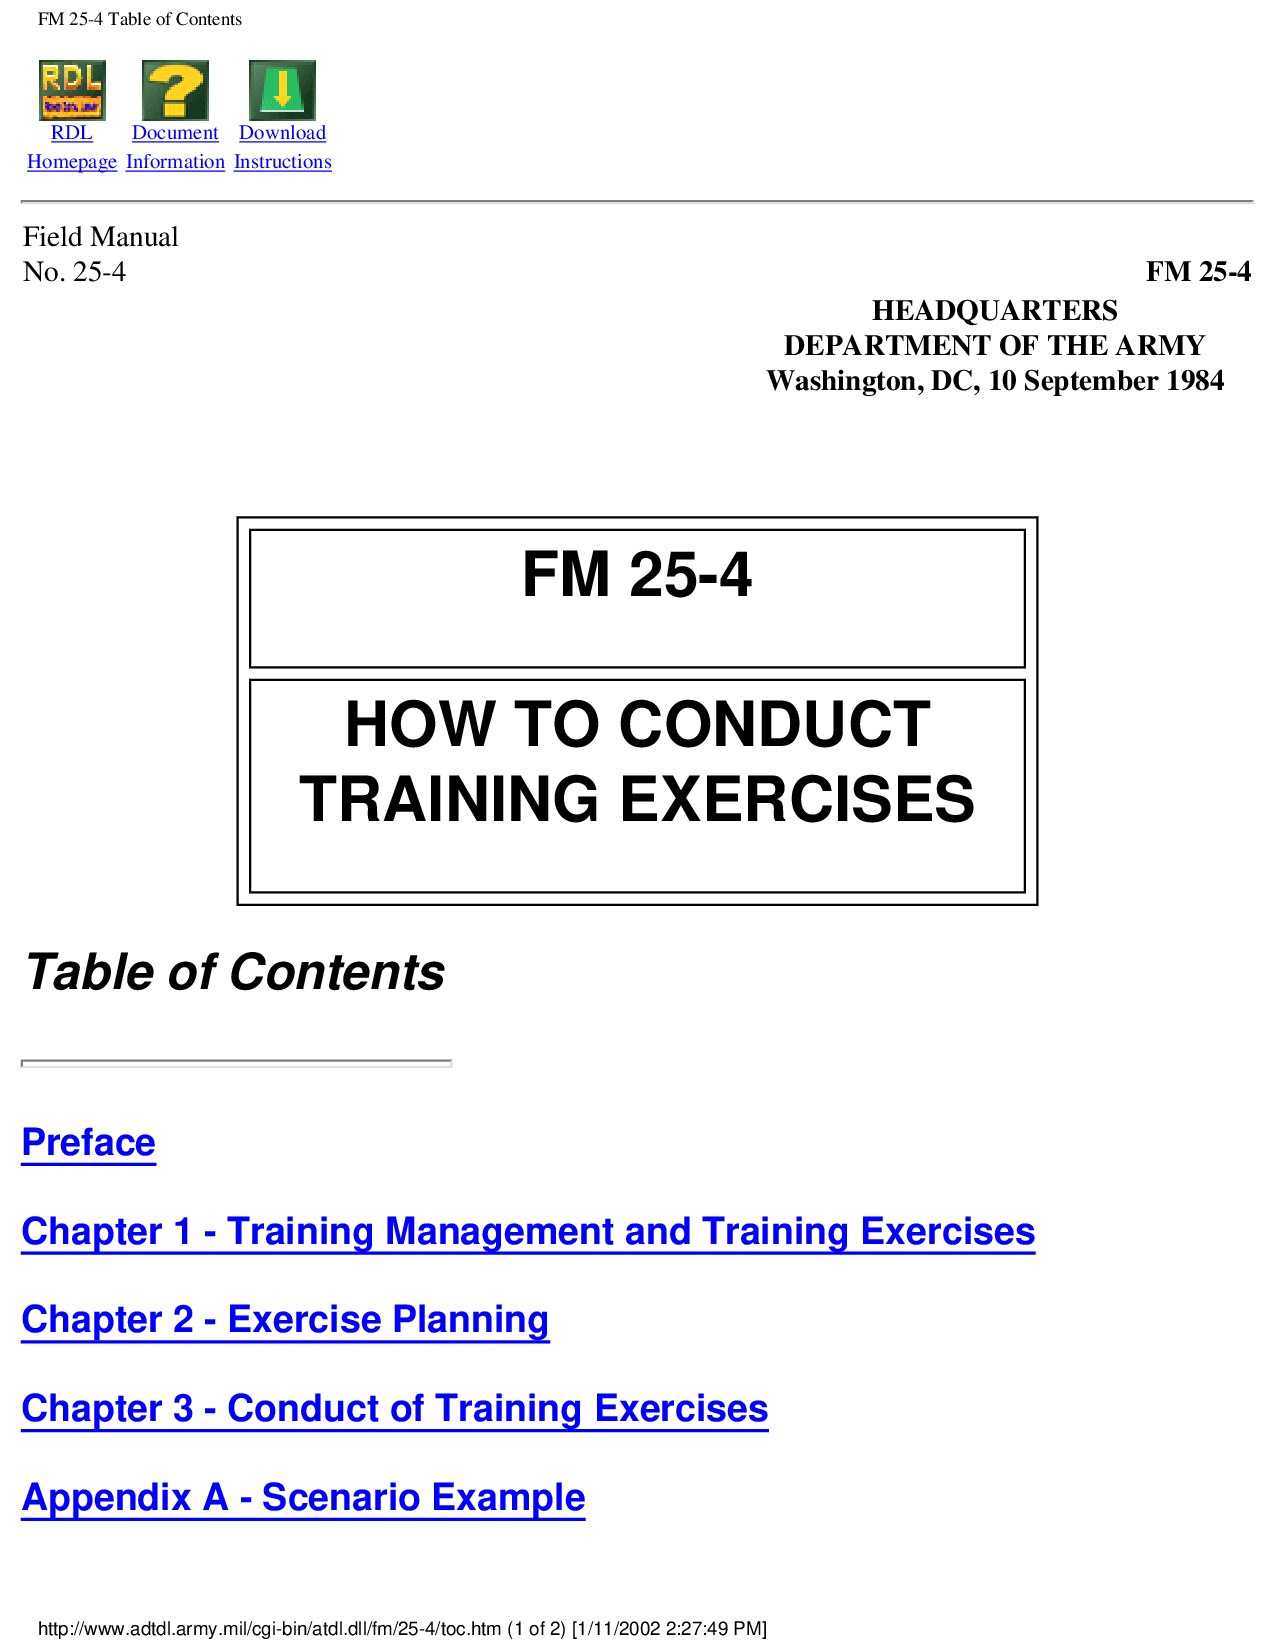 How to Conduct Training Exercises